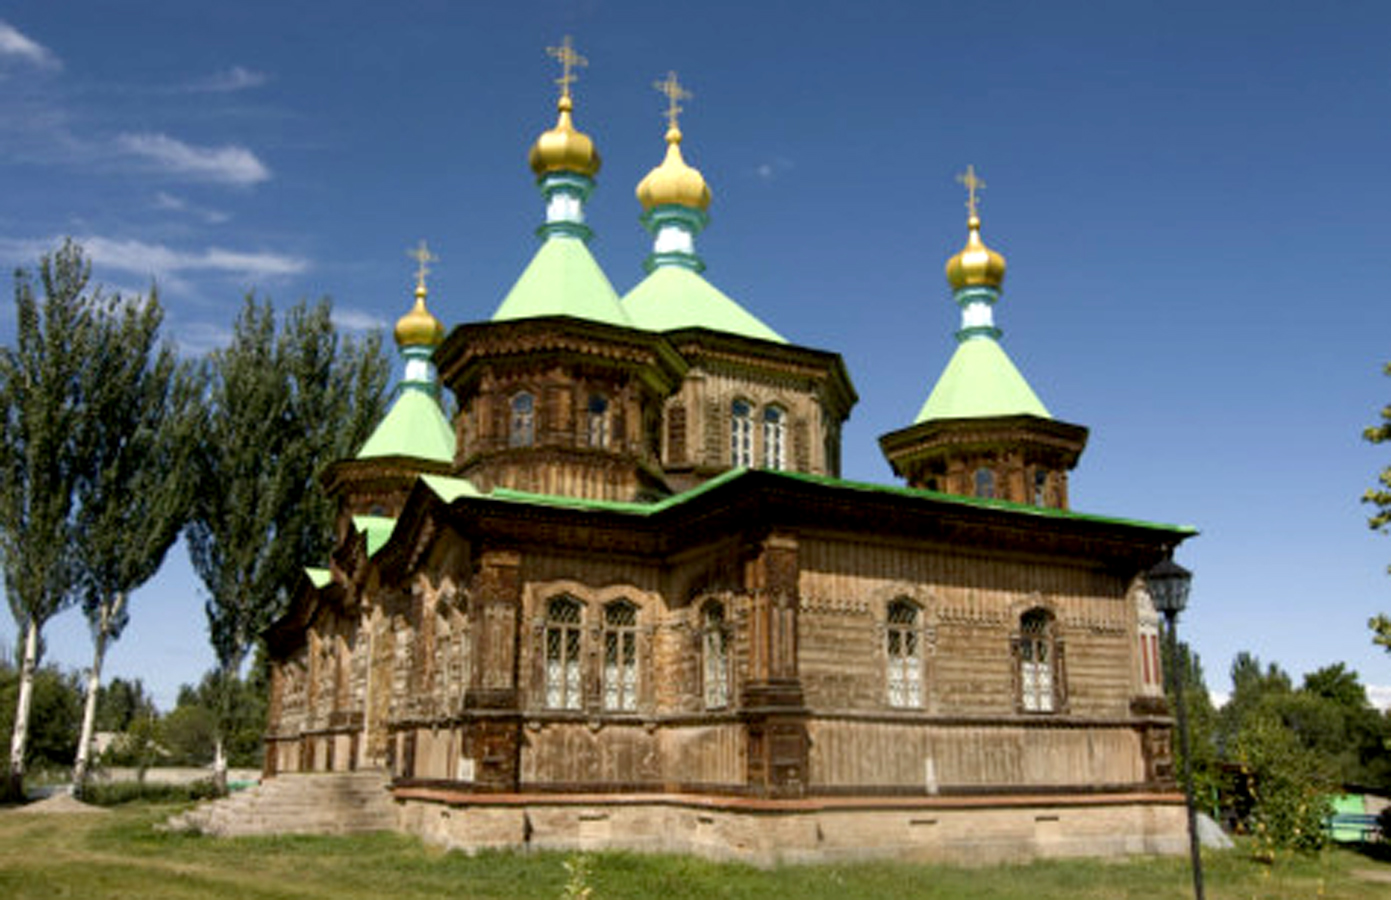 One of the many Russian Orthodox churches in Central Asia.